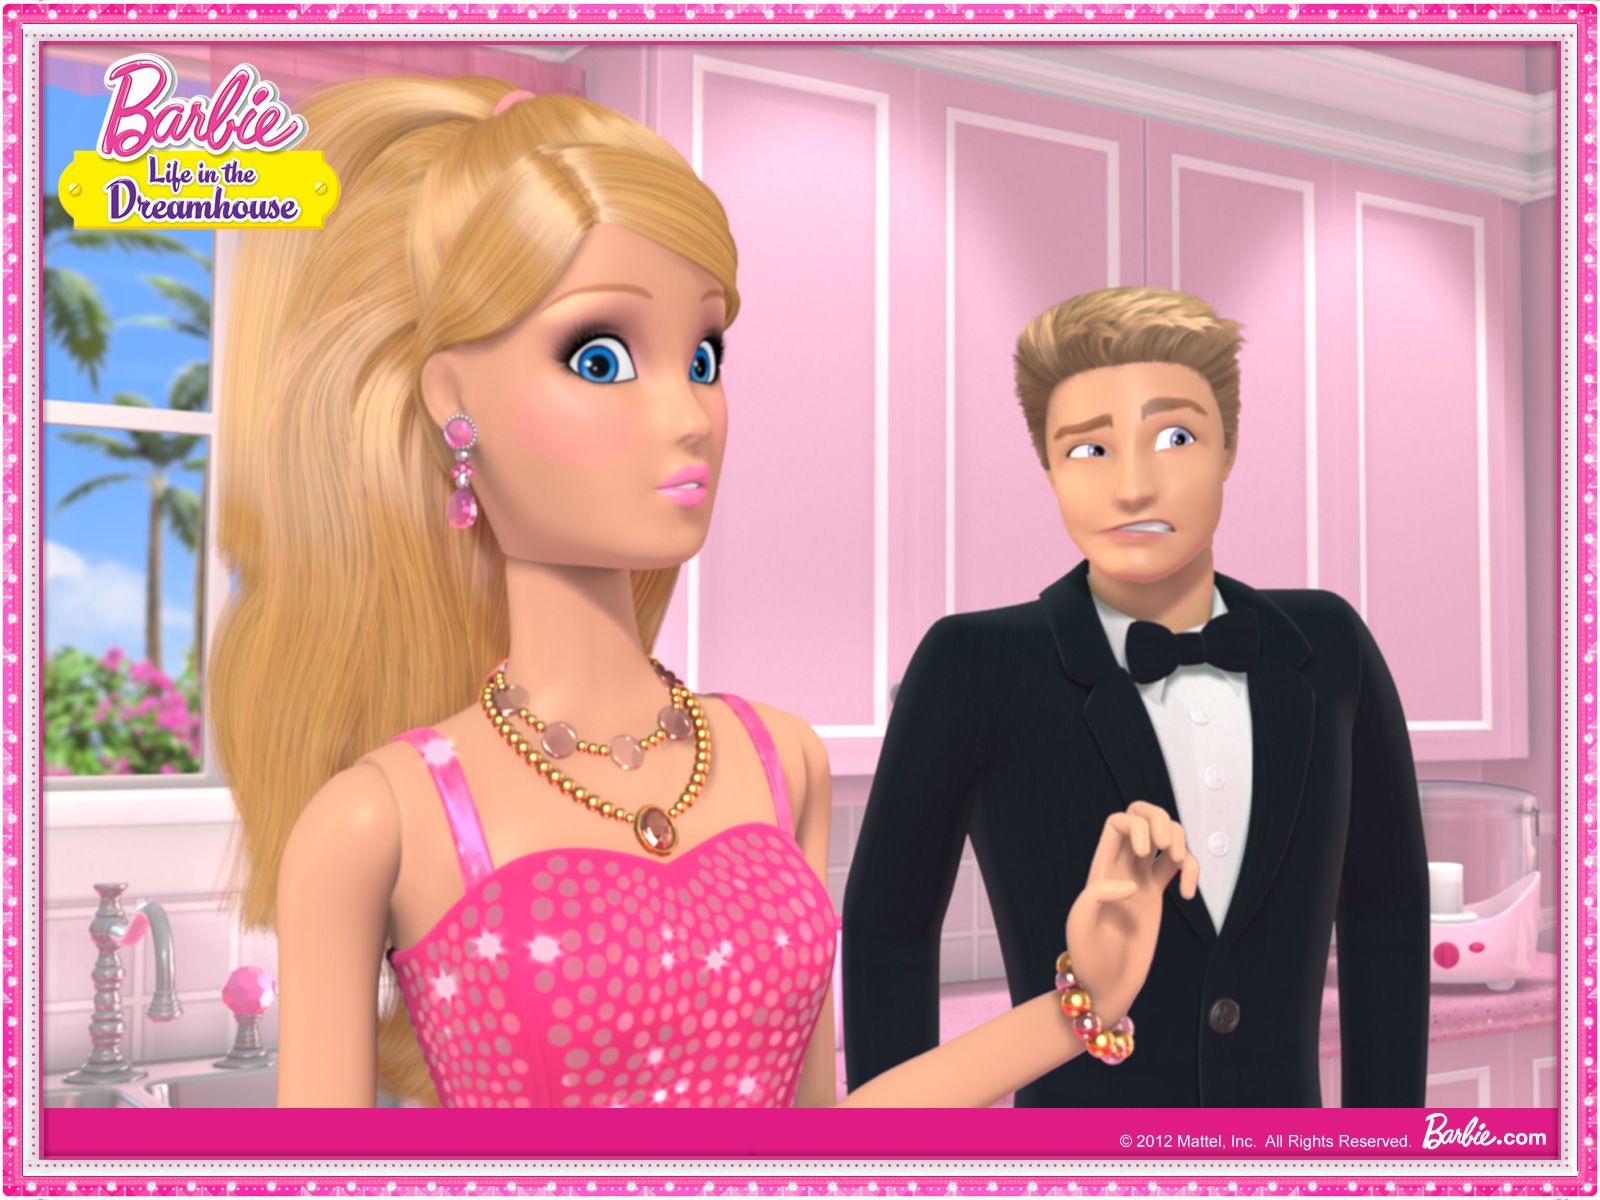 Barbie: Life in the Dreamhouse Wallpaper: Barbie Life In The Dream House. Barbie life, Barbie, Barbie image